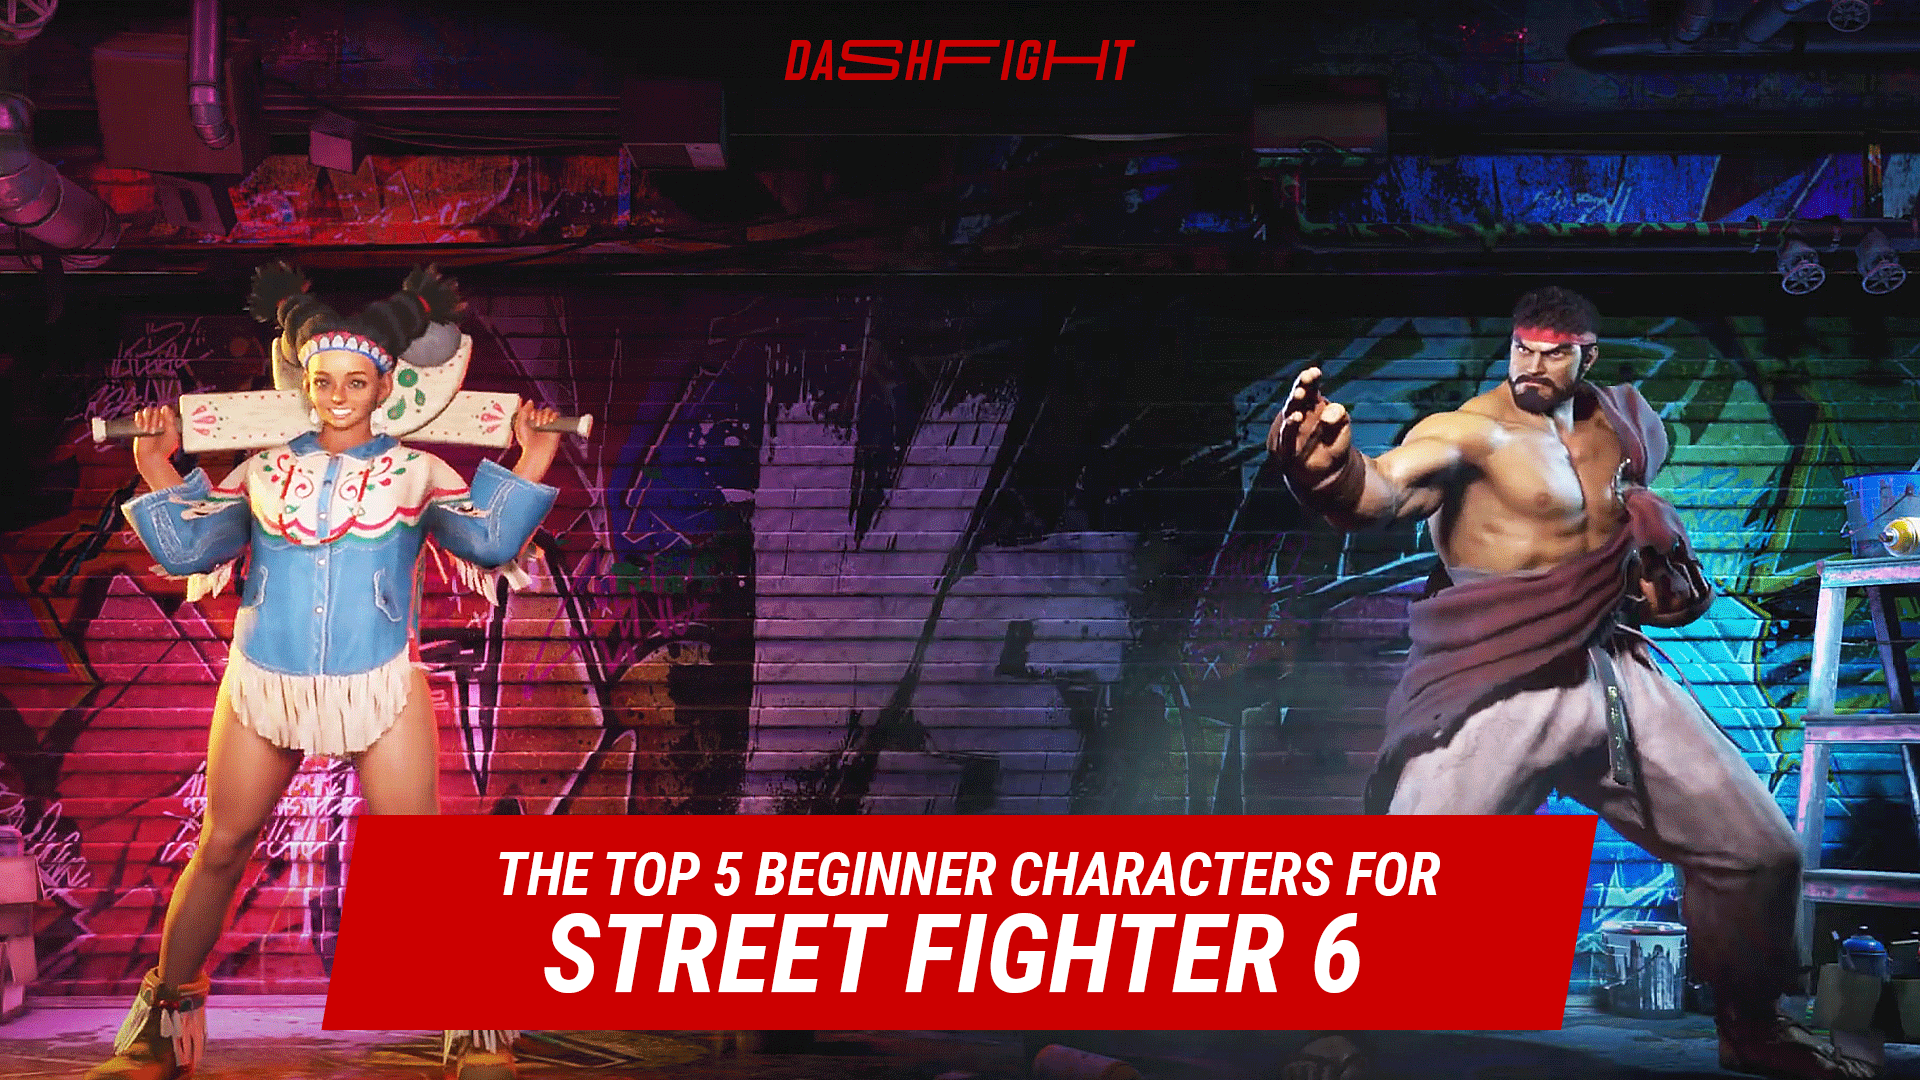 Ryu is at the point to master both light and darkness in Street Fighter 6  which may create the most powerful version of the warrior yet